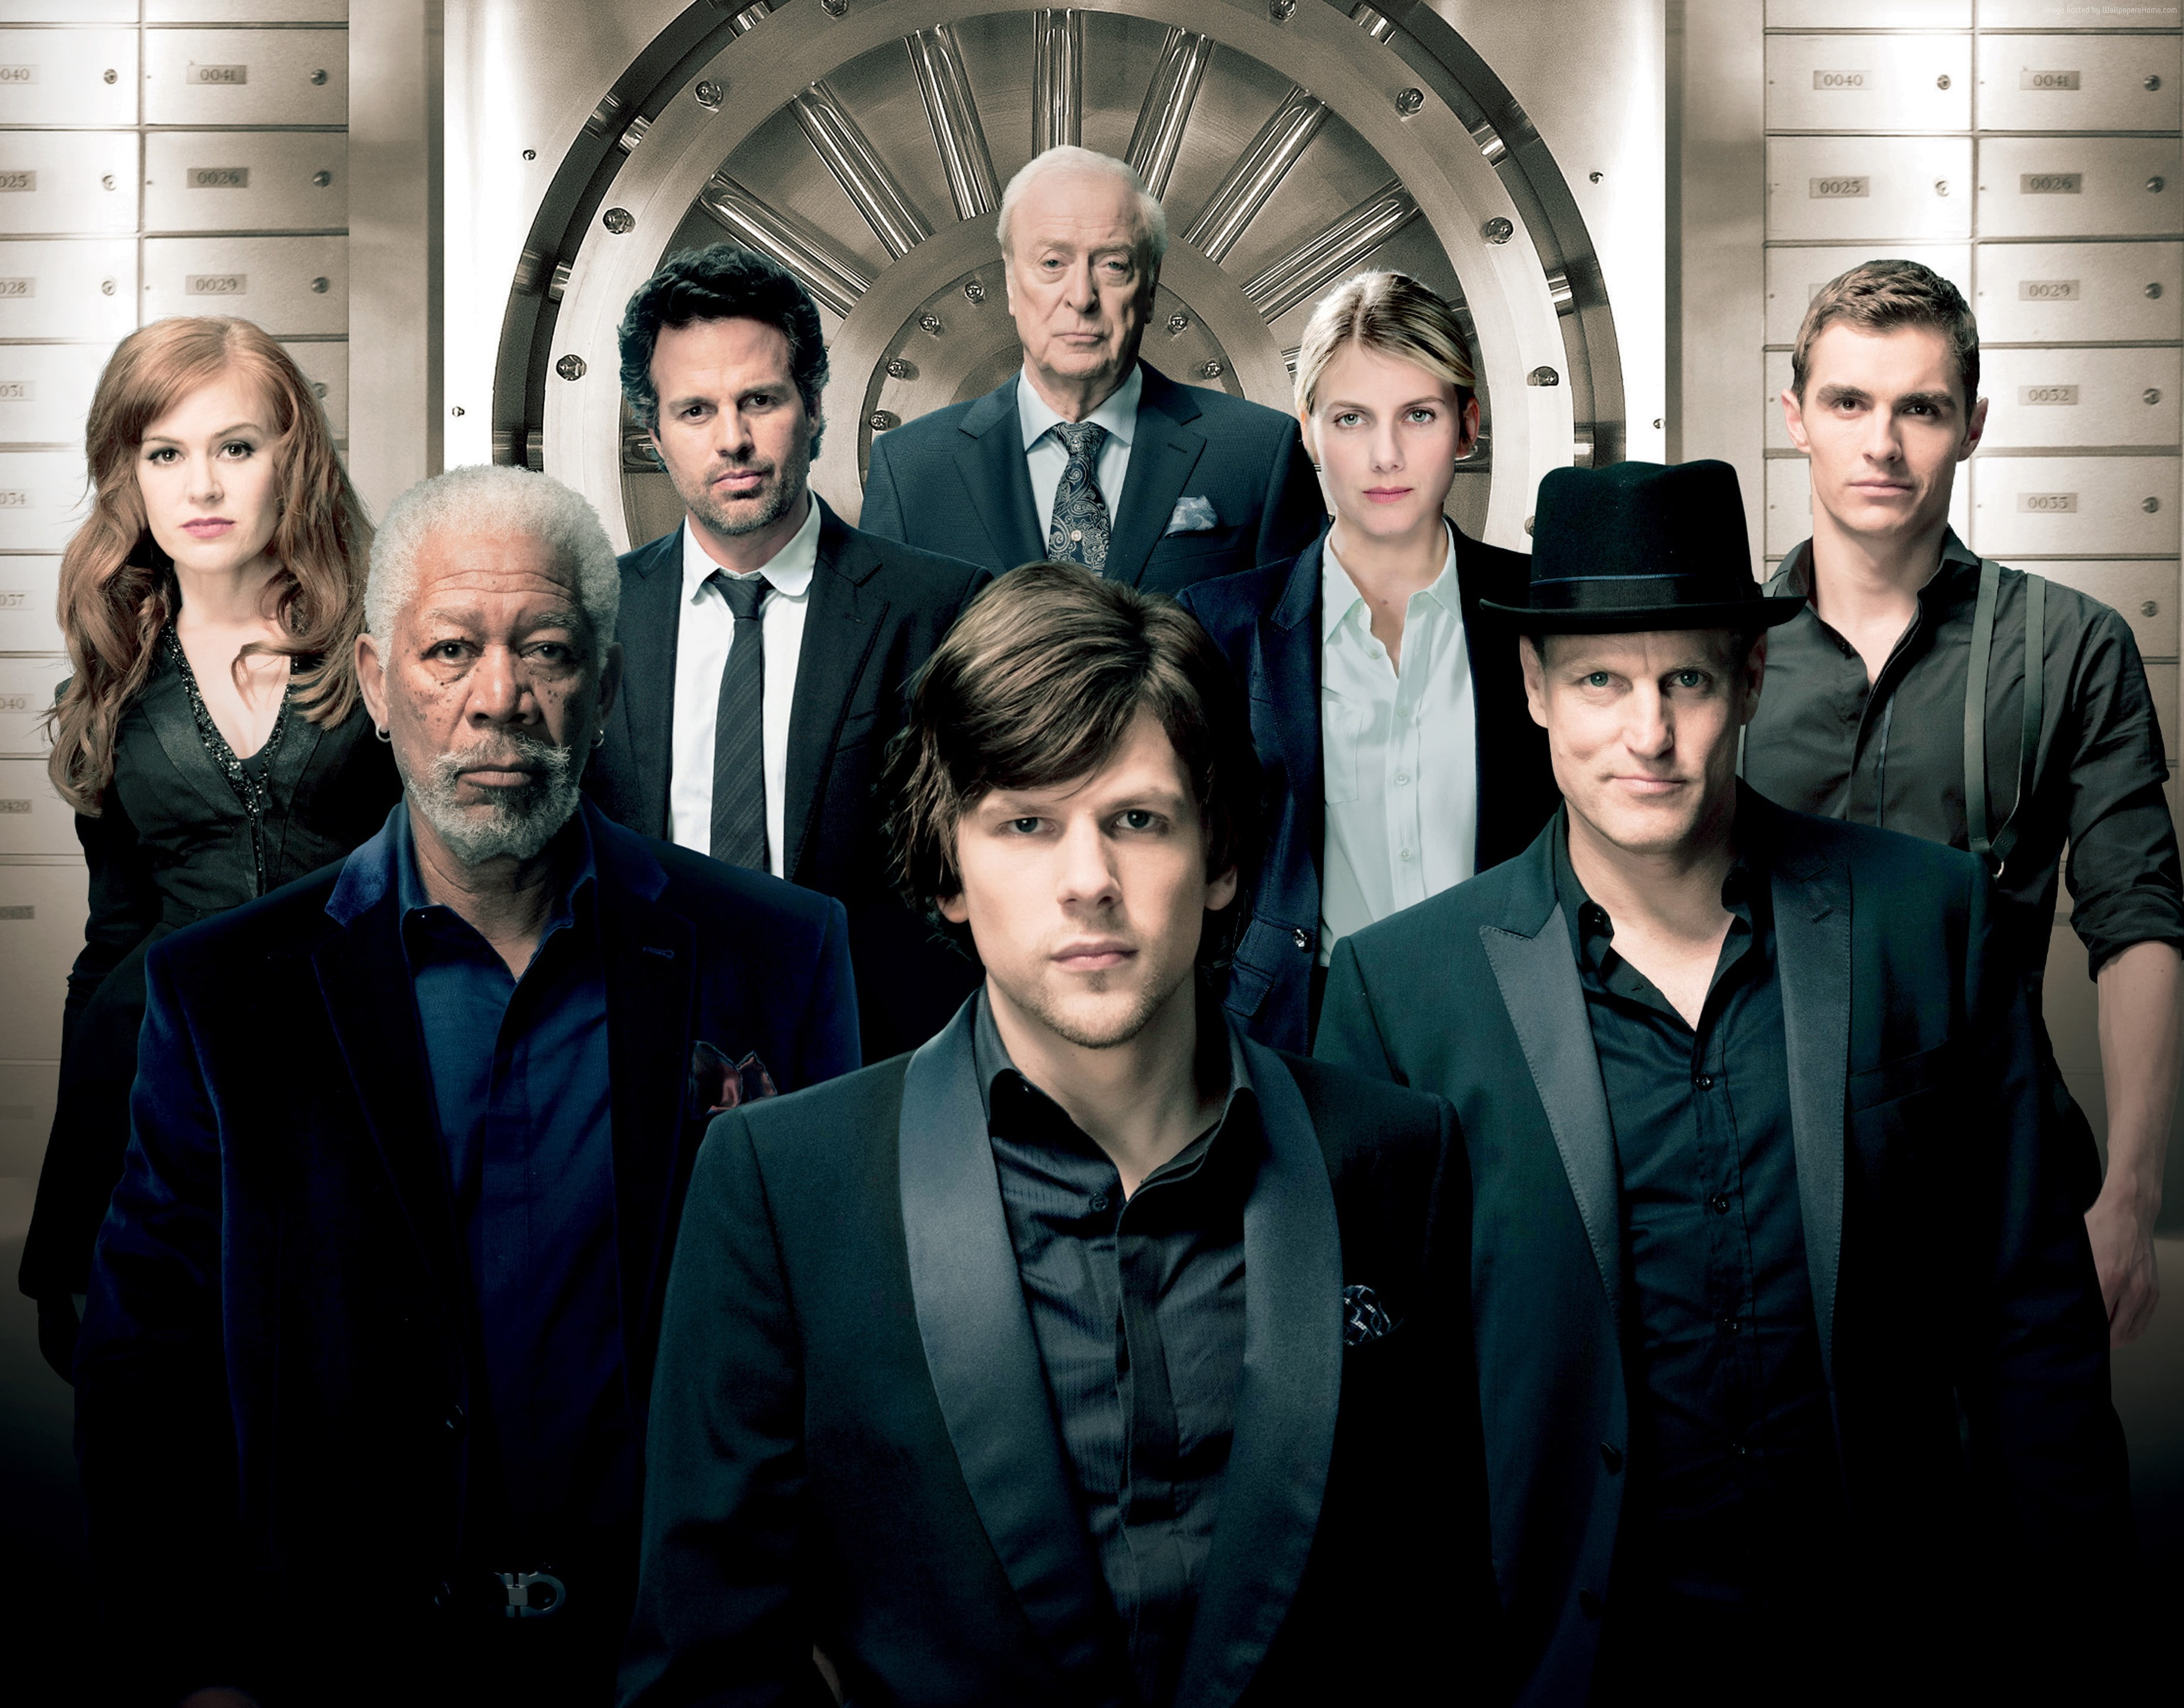 Dave Franco, Woody Harrelson, Now You See Me 2, Jesse Eisenberg